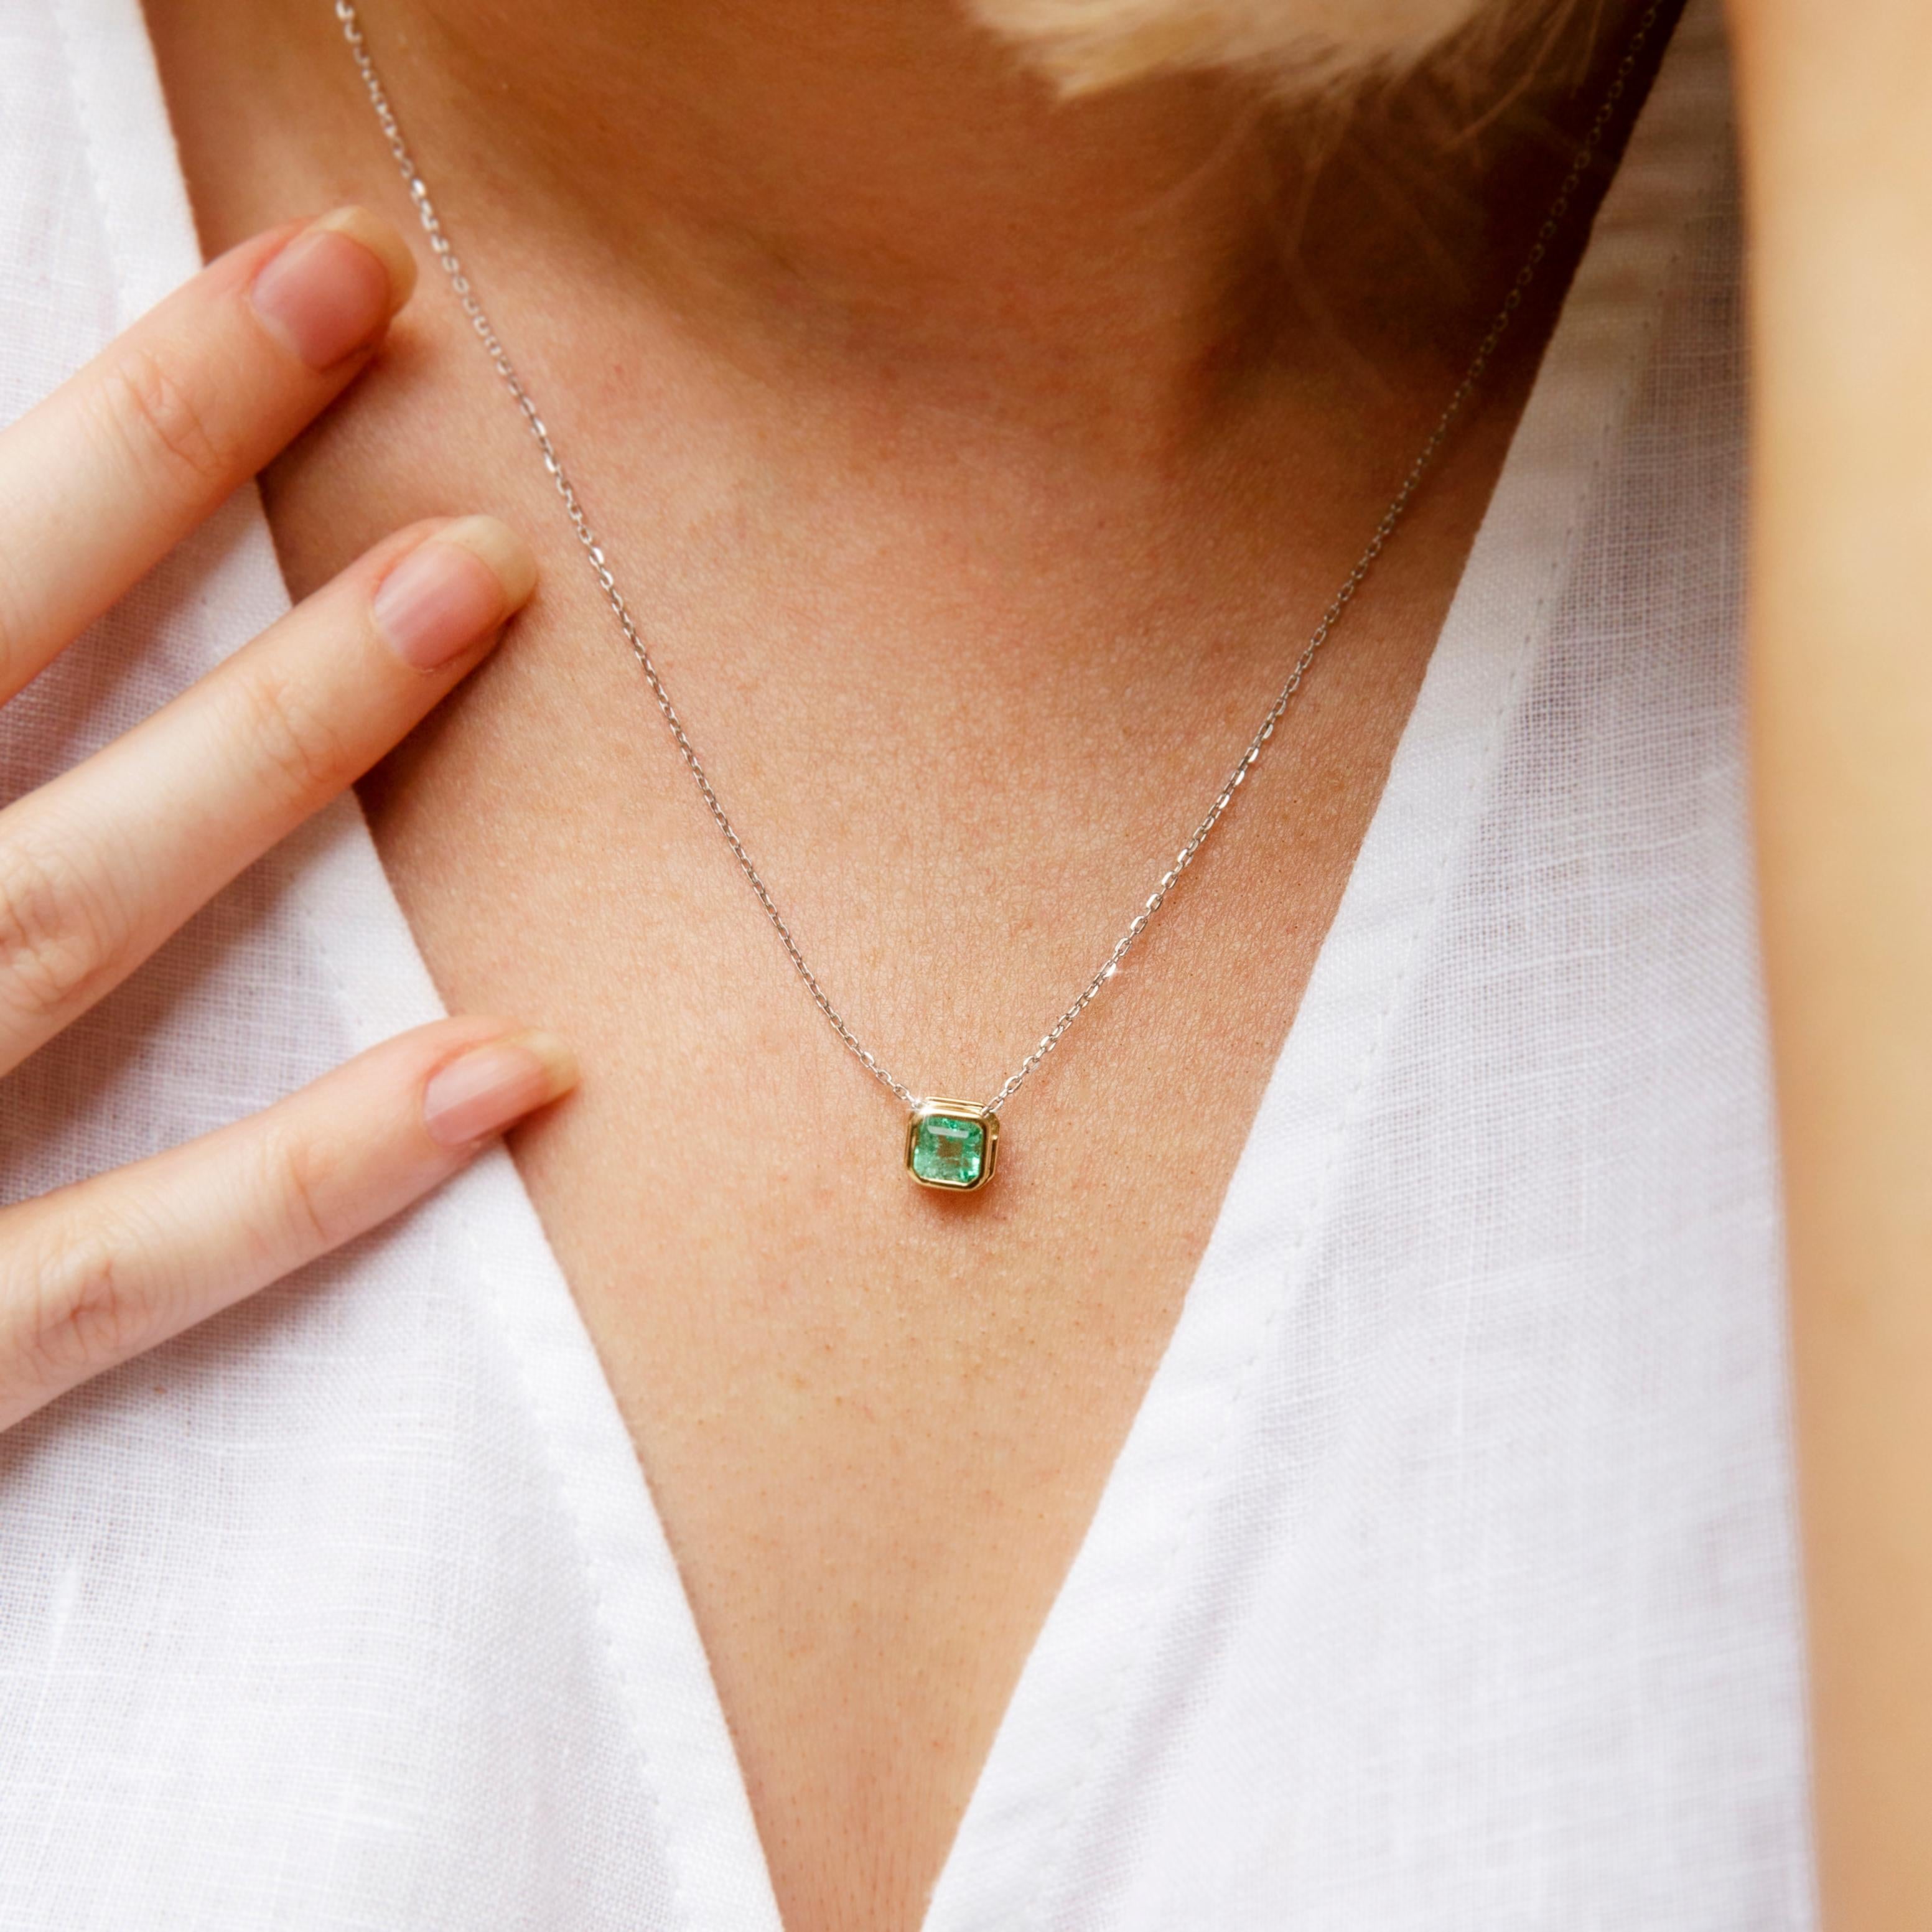 Crafted in 18 carat yellow gold, the lovely necklet features an elegant fine white gold chain holding a gorgeous square cut emerald in a yellow gold bezel setting. Her name is The Kyria Pendant. She is a wonderful choice for light and comfortable